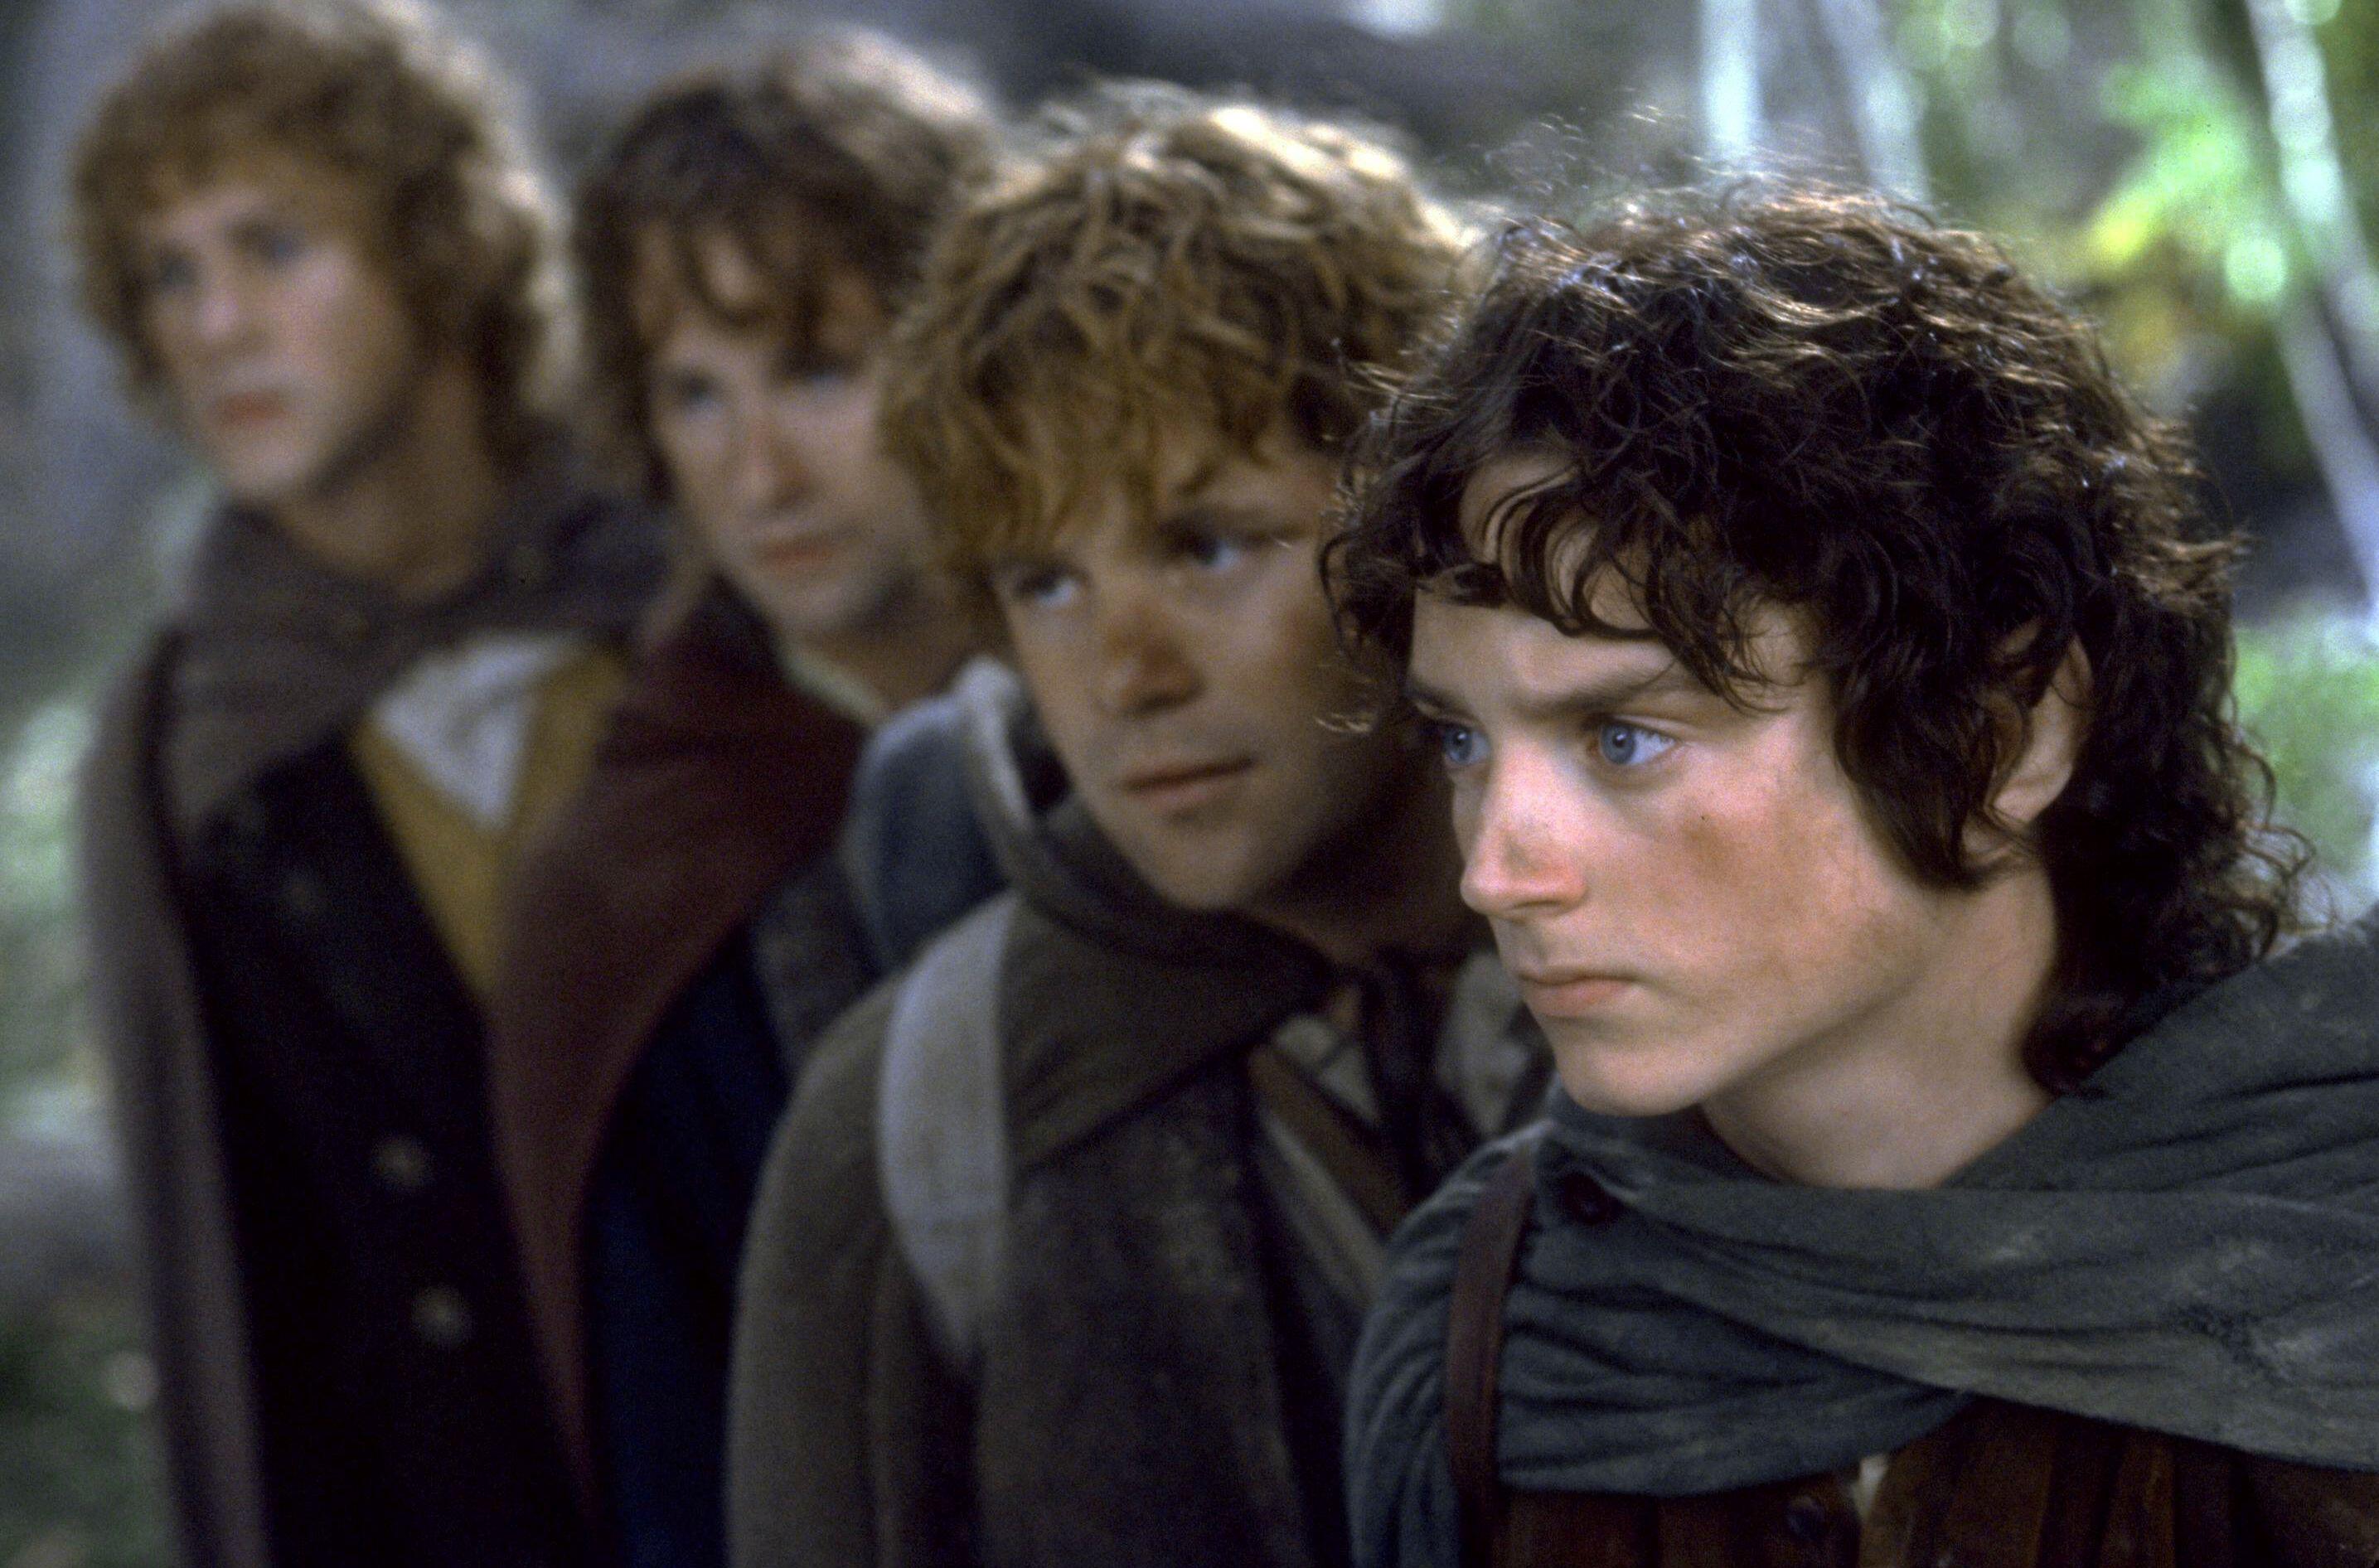 Elijah Wood pictured in a scene from The Lord Of The Rings: The Fellowship Of The Ring